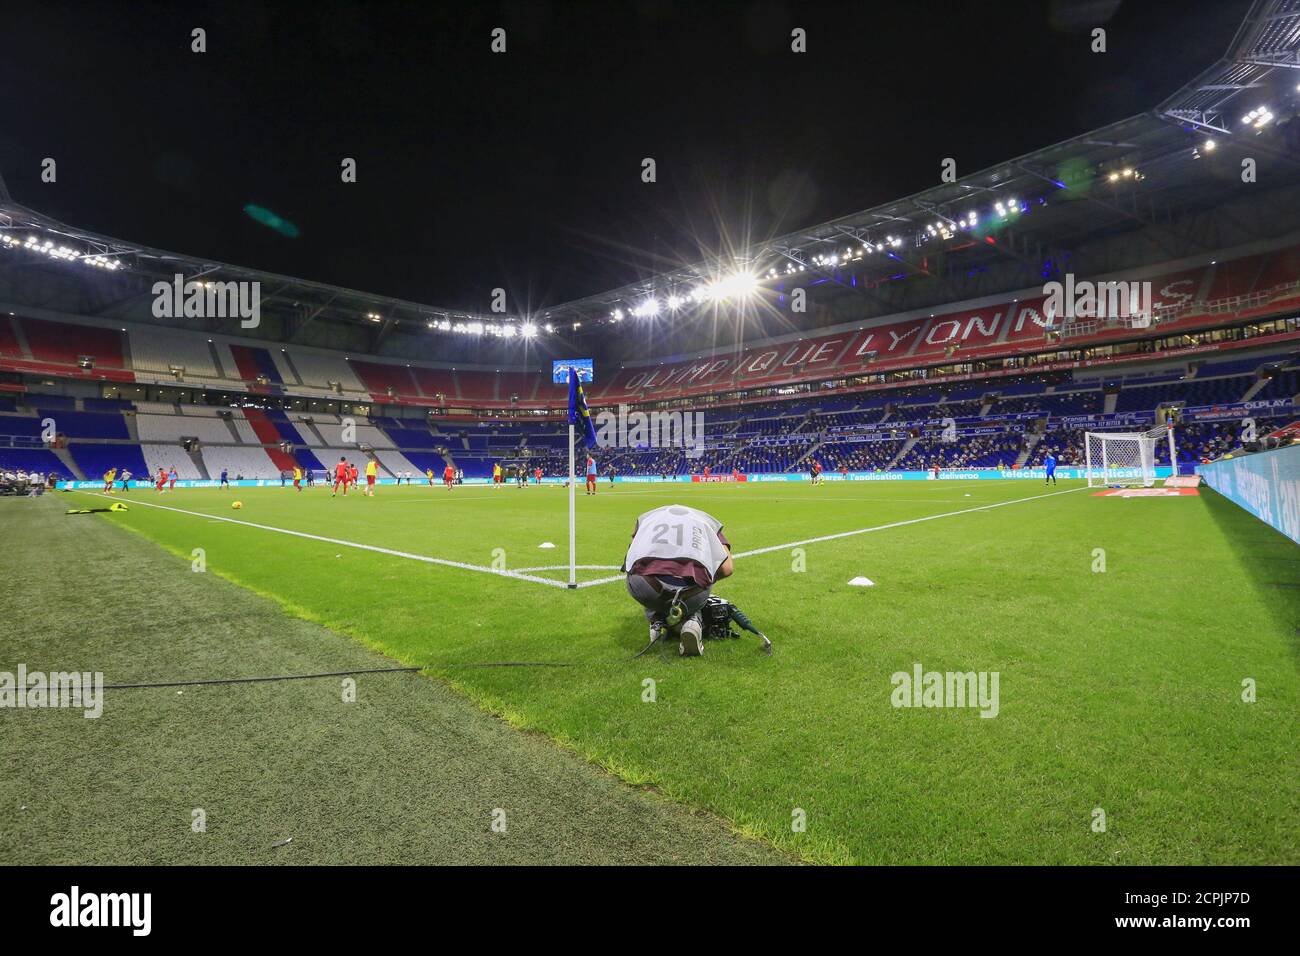 General view of Groupama Stadium during the French championship Ligue 1 football match between Olympique Lyonnais and Nimes Olympique on September 18, Stock Photo